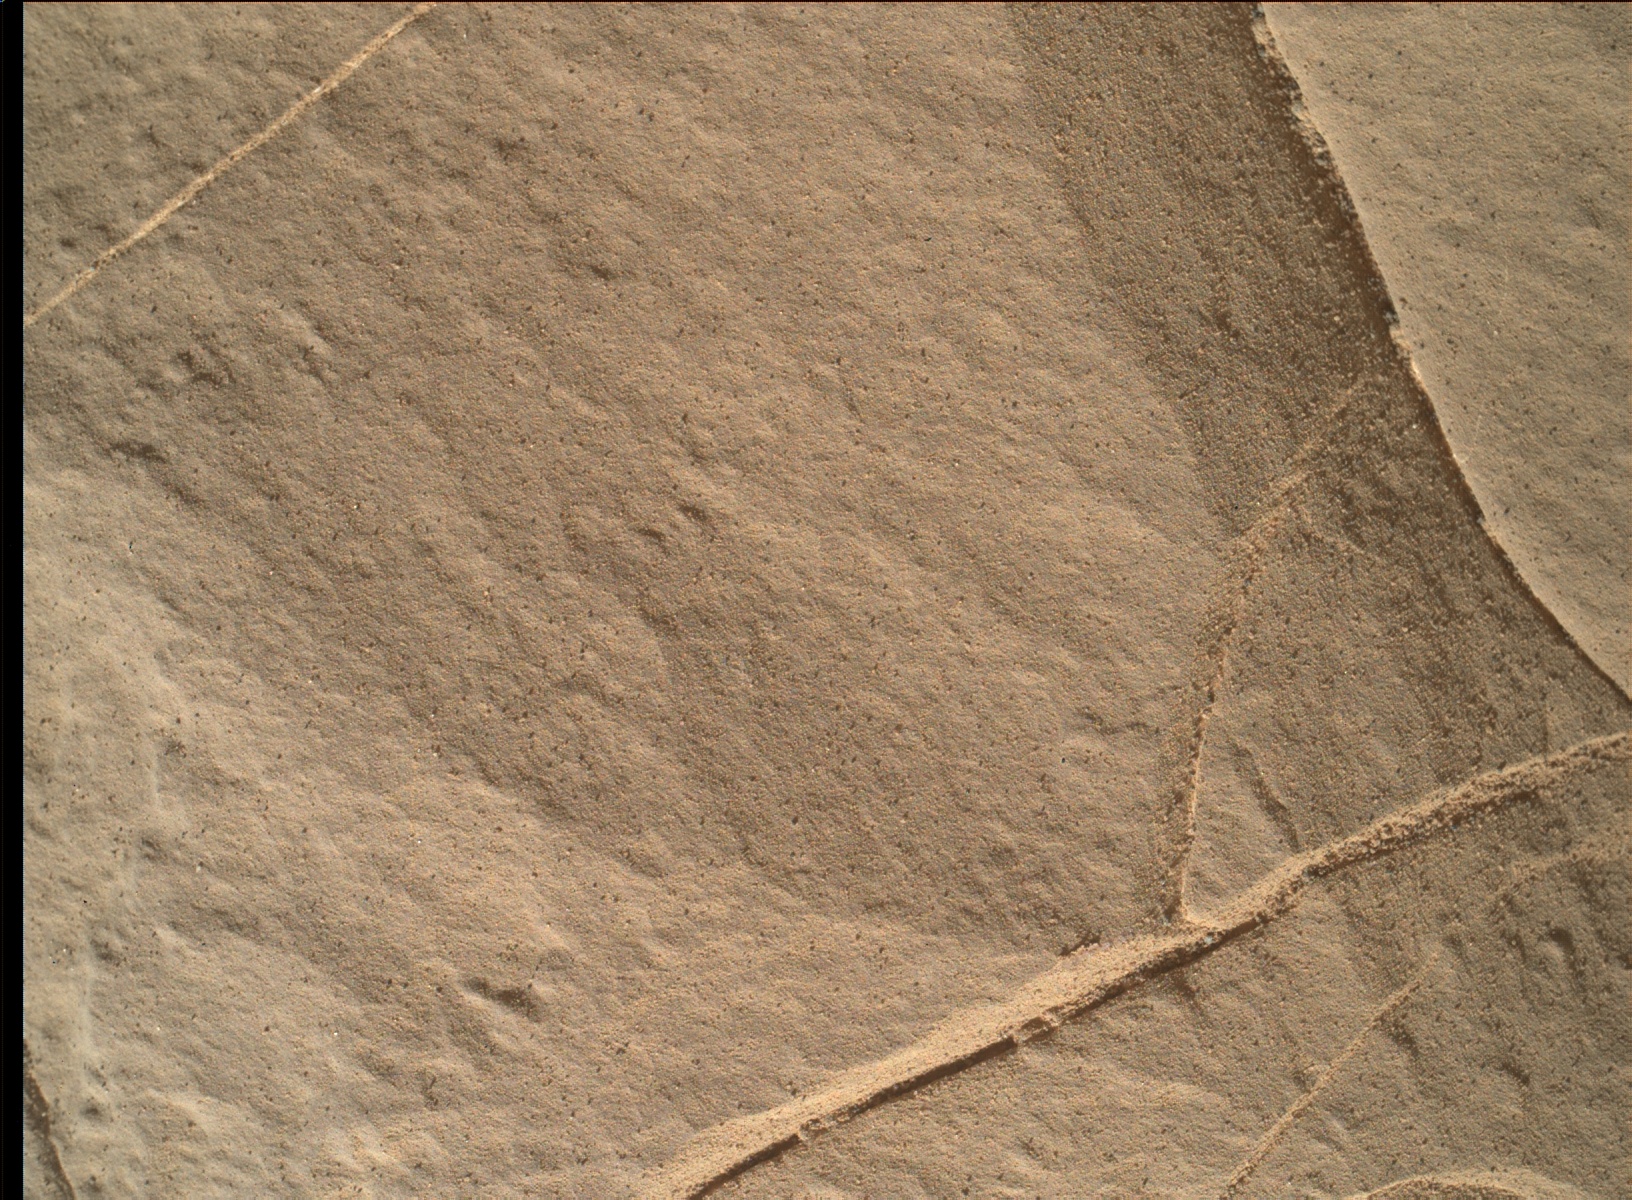 Nasa's Mars rover Curiosity acquired this image using its Mars Hand Lens Imager (MAHLI) on Sol 1821